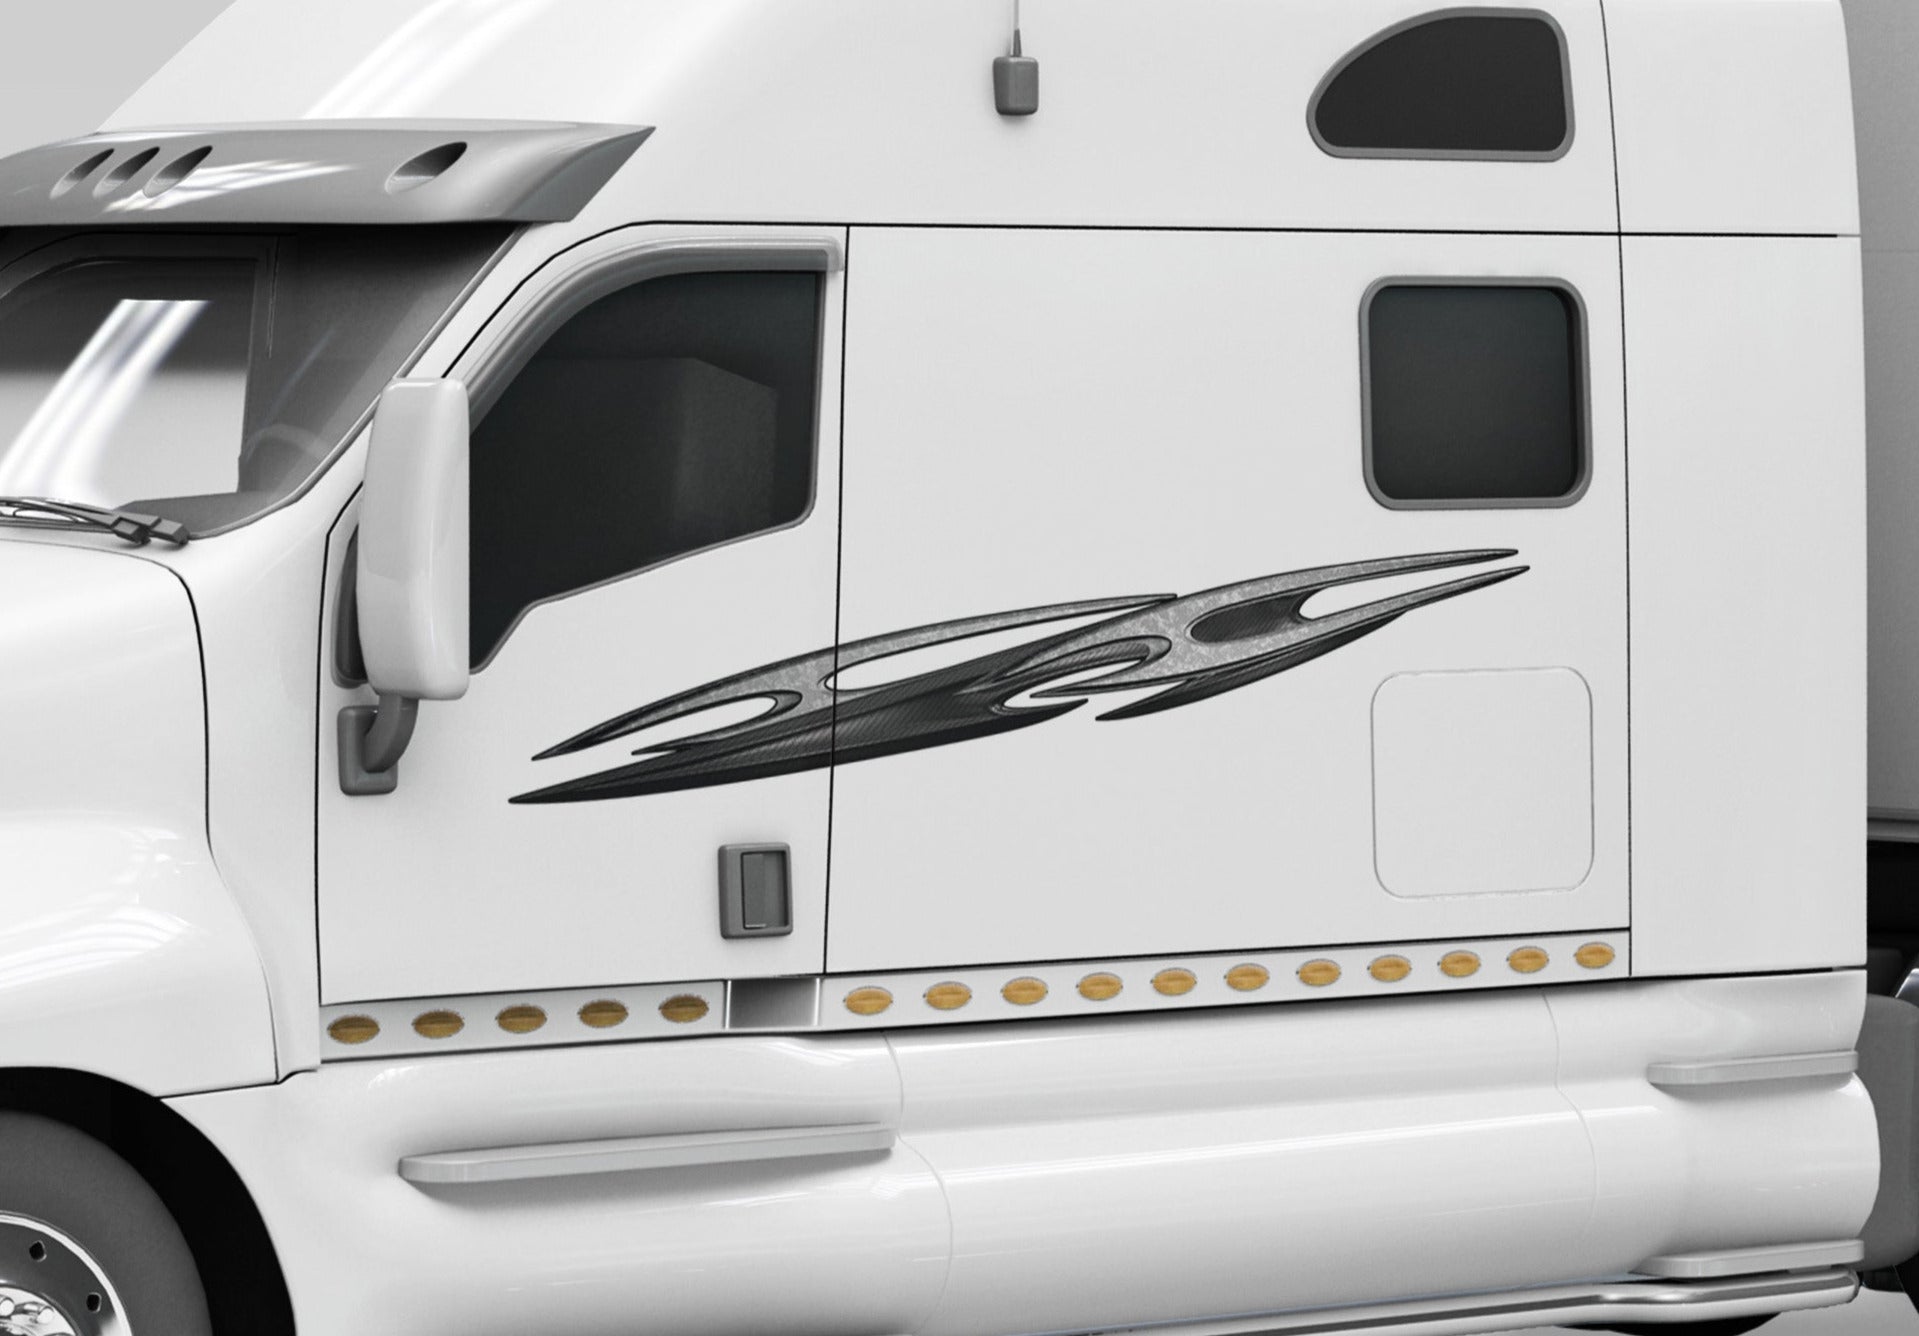 tribal carbon fiber spear decal on the side of white semi trailer